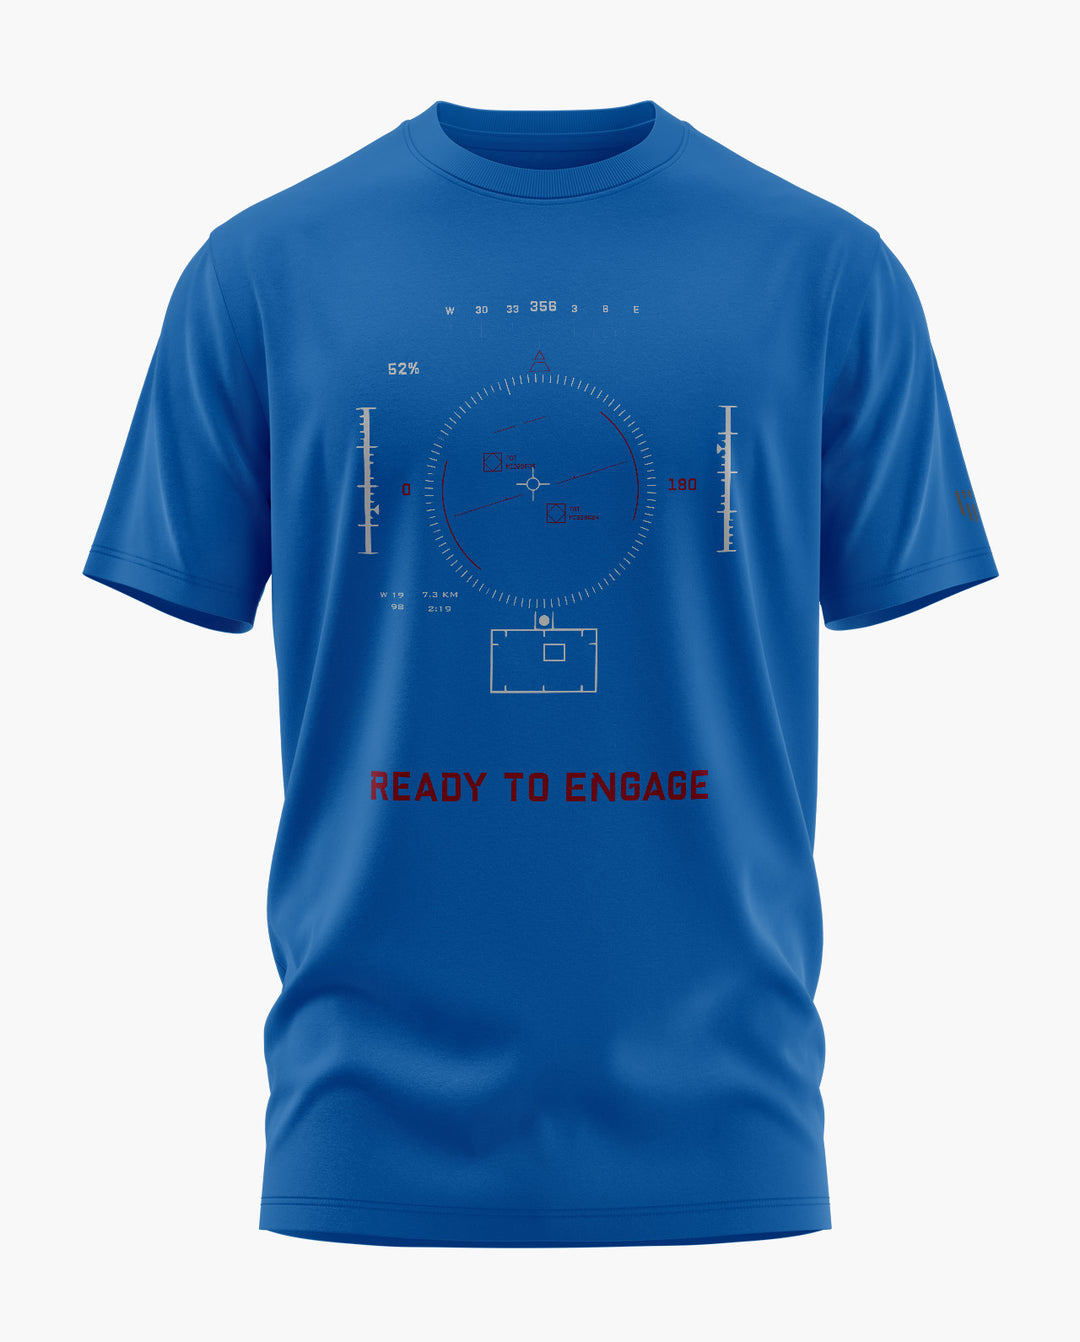 READY TO ENGAGE T-Shirt